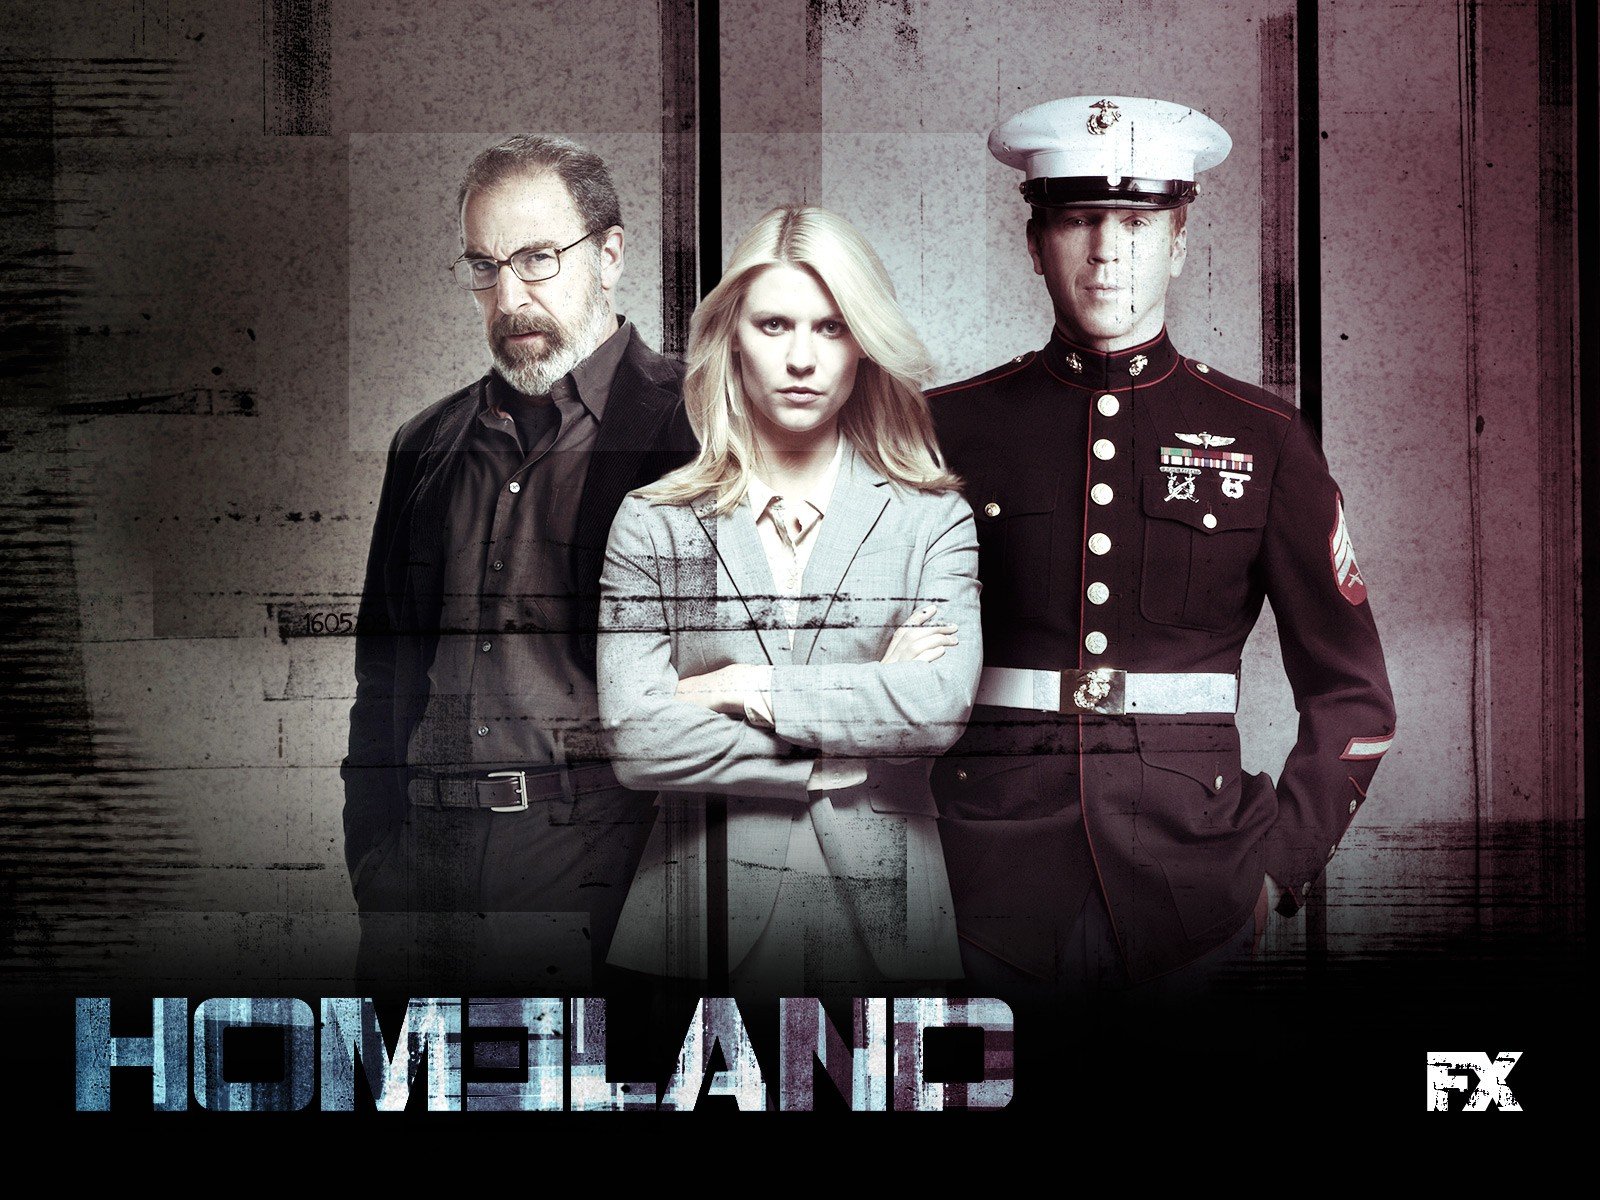 c, I, A, , Us, Marines, Corps, Carrie, Claire, Danes, Showtime, Damian, Lewis, Mandy, Patinkin, Tv, Shows, Homeland, Carrie, Mathison, Nicholas, Brody, Saul, Berenson Wallpaper